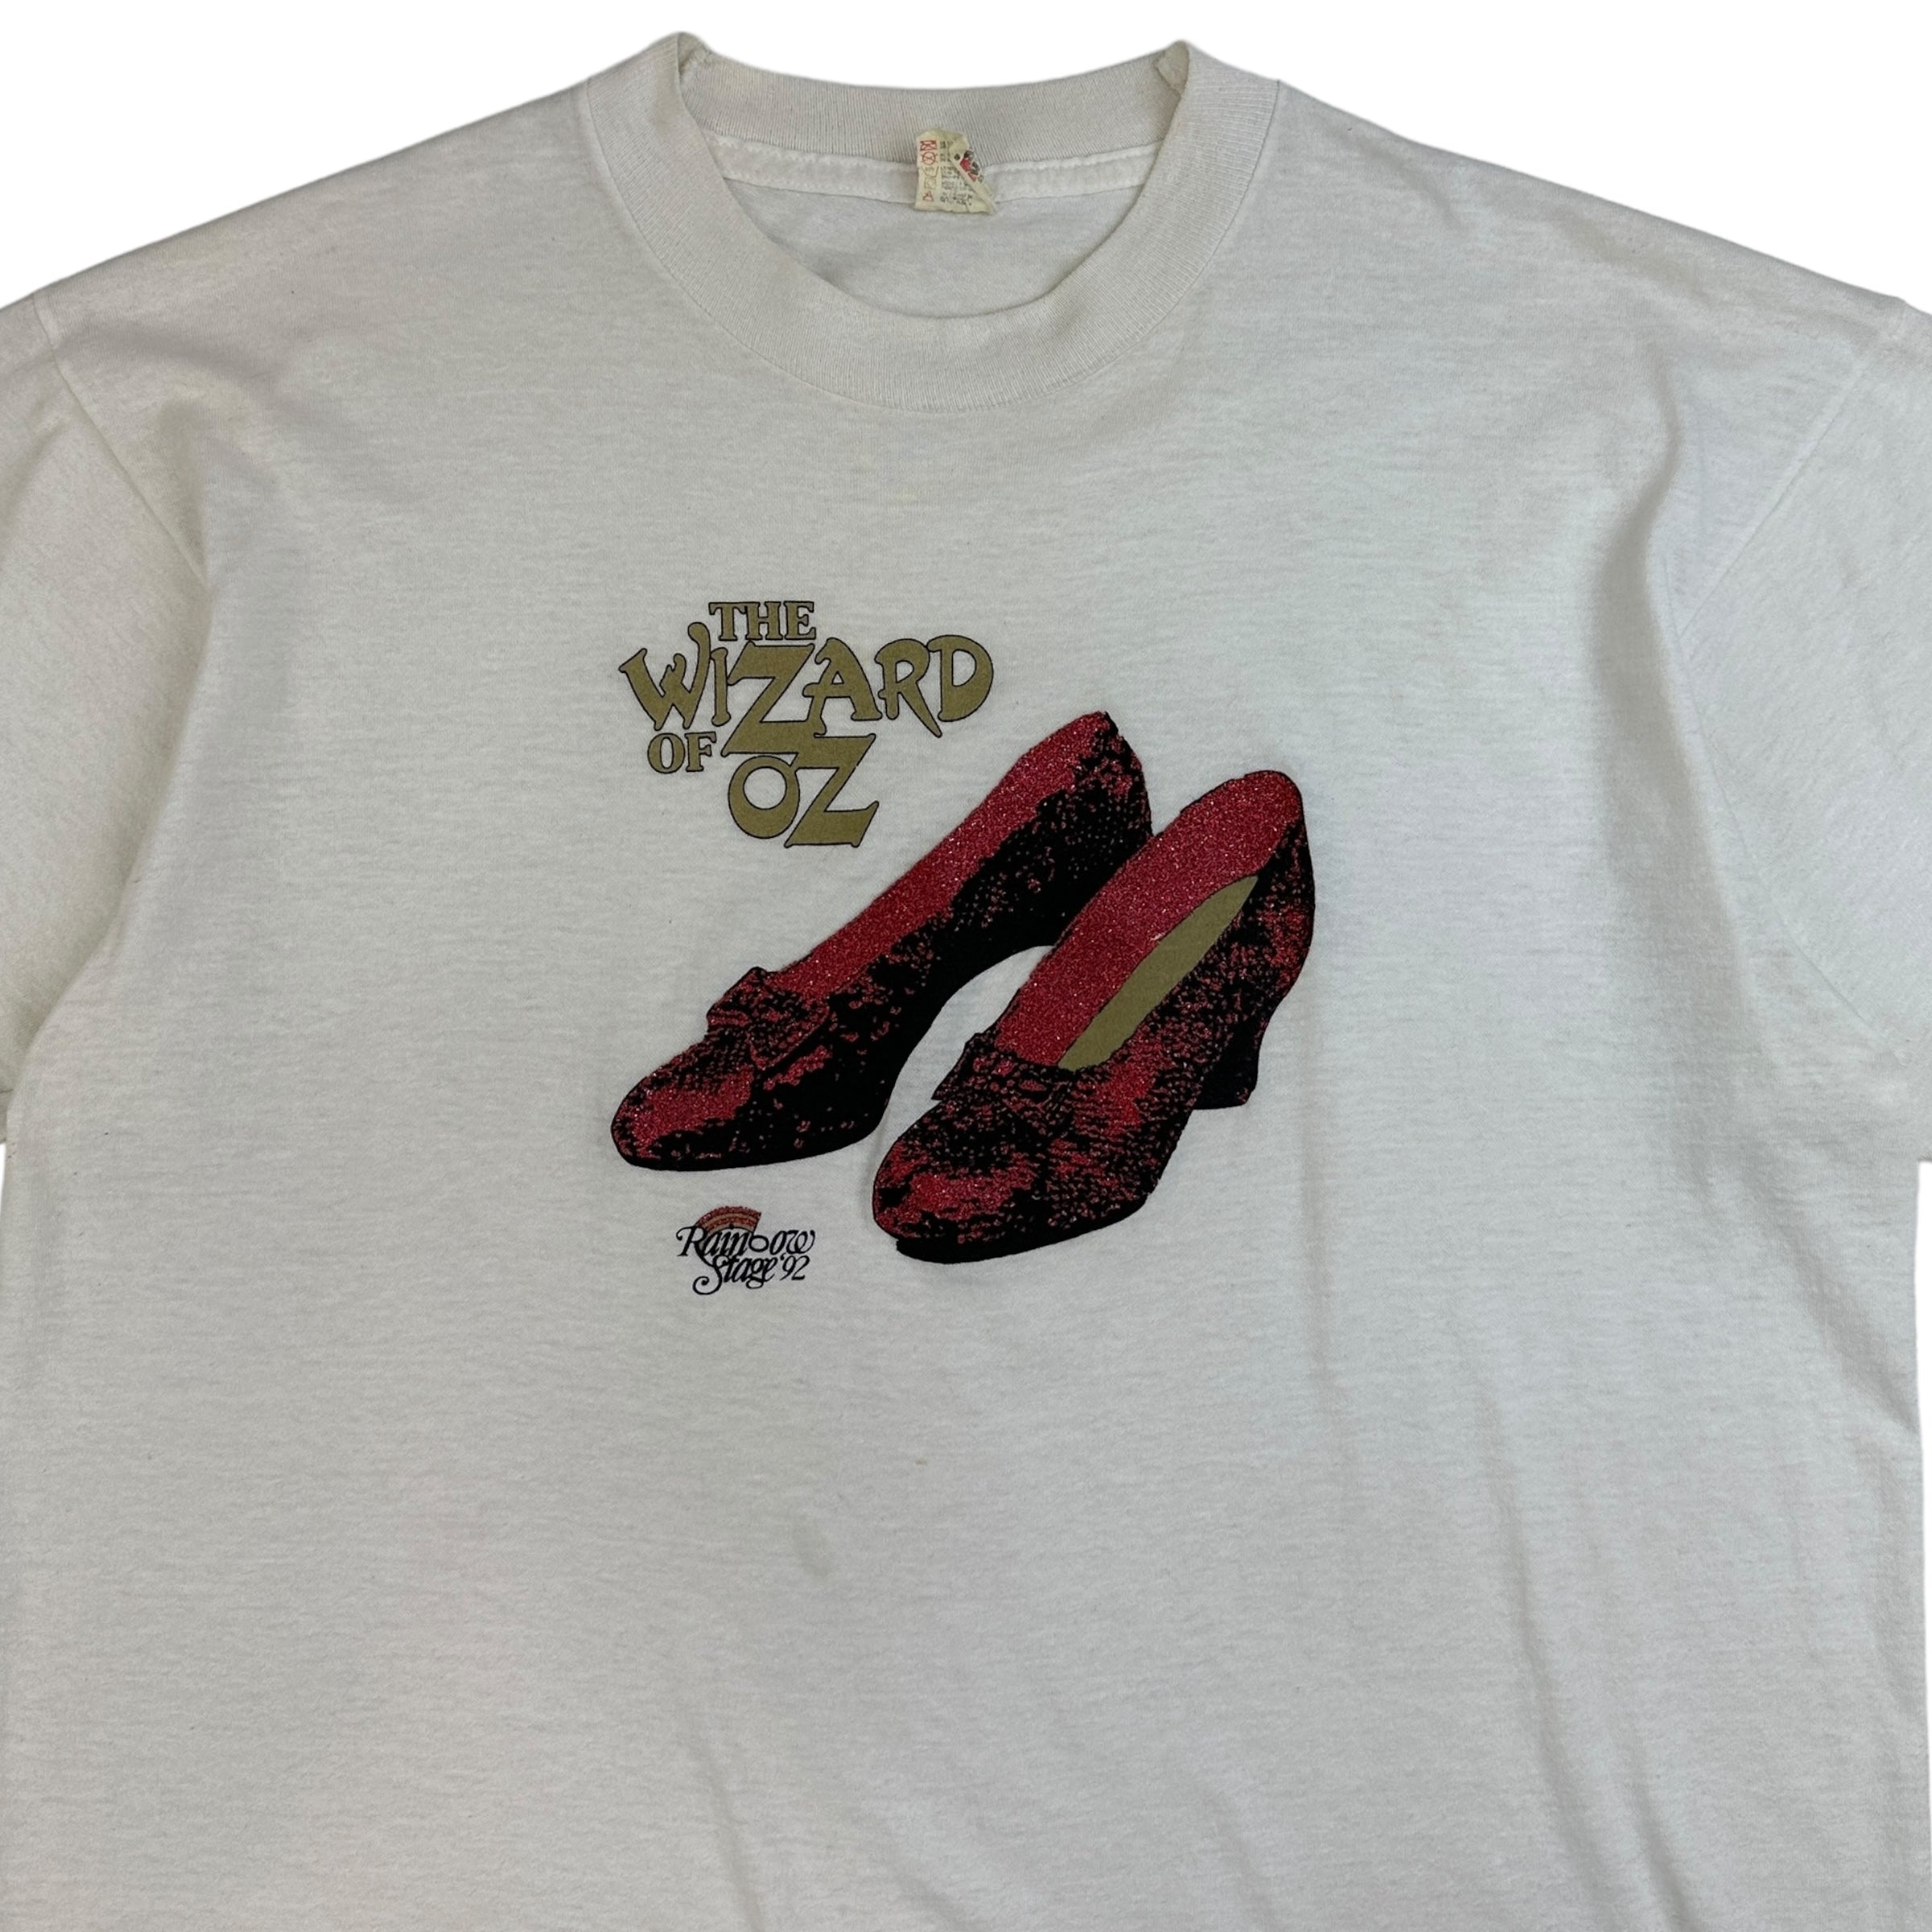 Vintage The Wizard Of Oz Red Slipper Tee